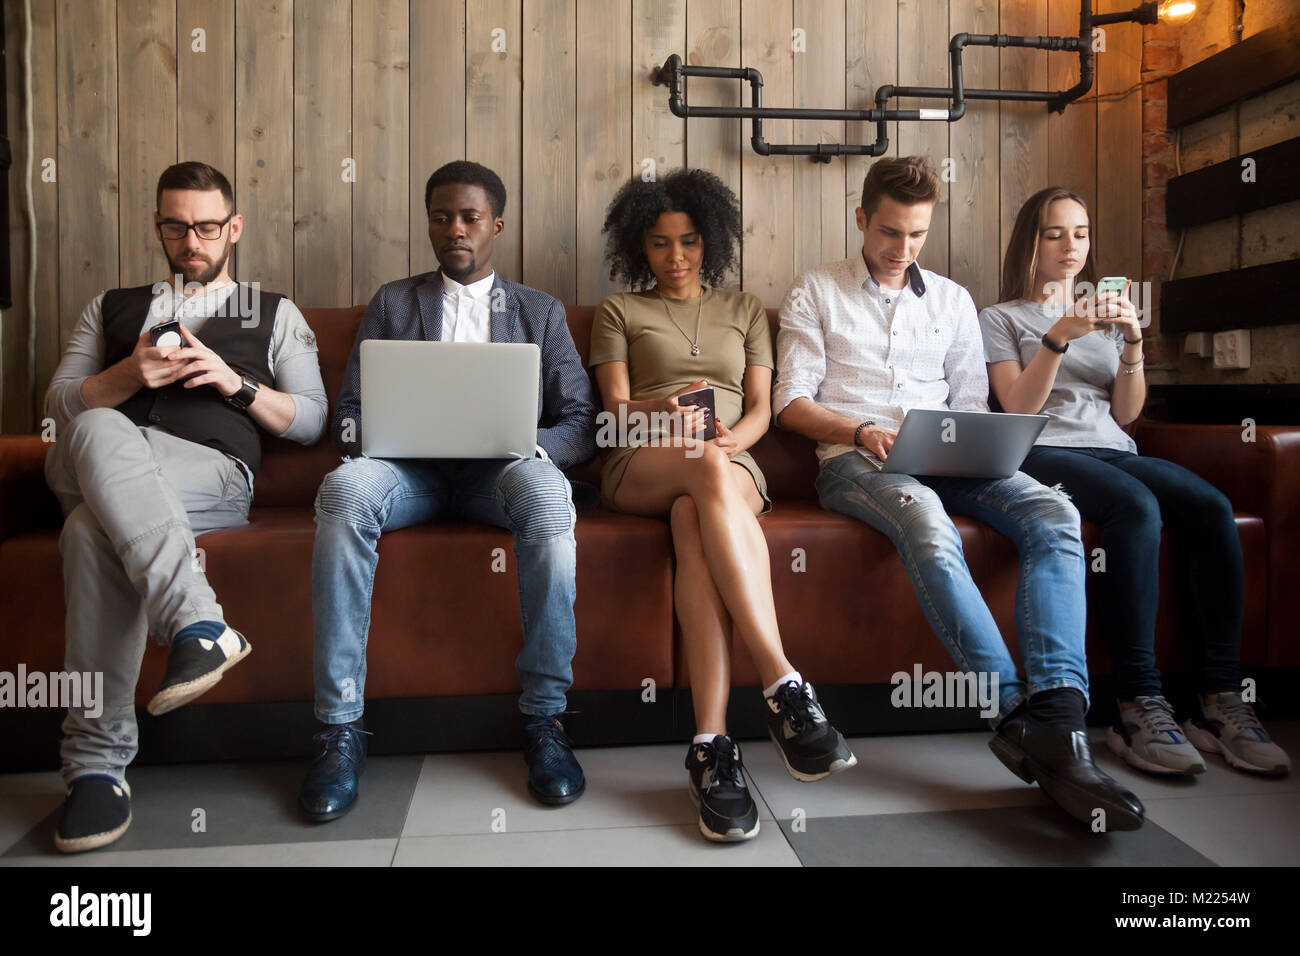 Diverse young people sitting in row obsessed with devices online Stock Photo